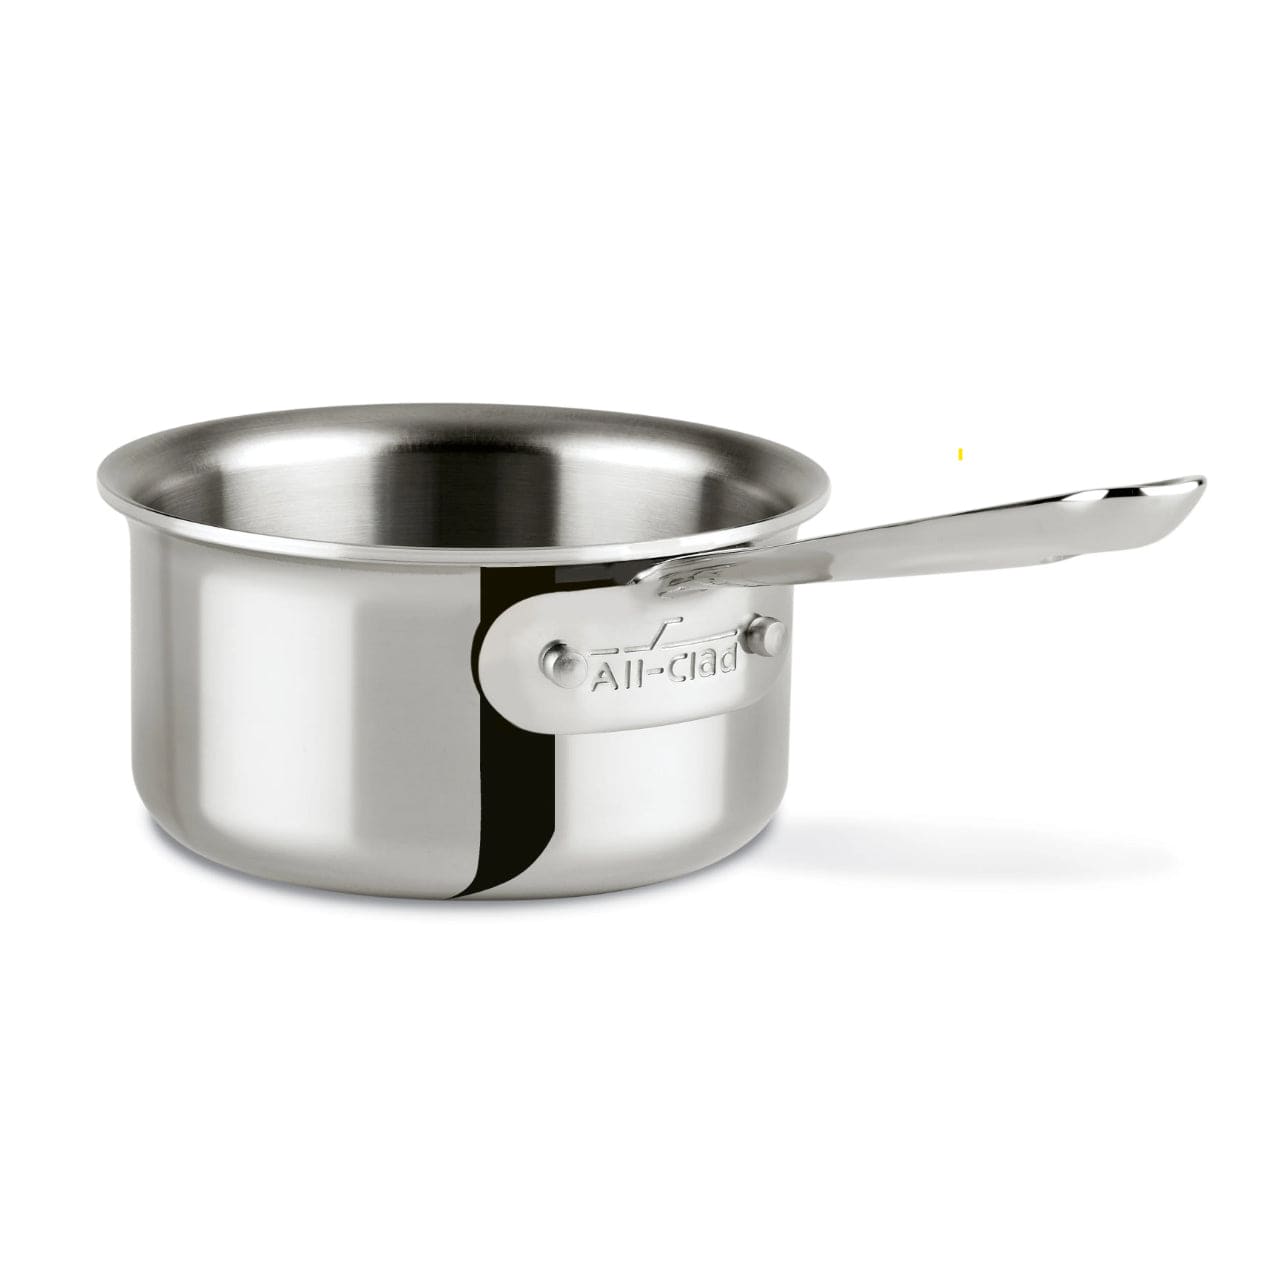 https://kitchenandcompany.com/cdn/shop/files/all-clad-all-clad-stainless-steel-1-2-qt-butter-warmer-13081-34068326088864_5000x.jpg?v=1682972732